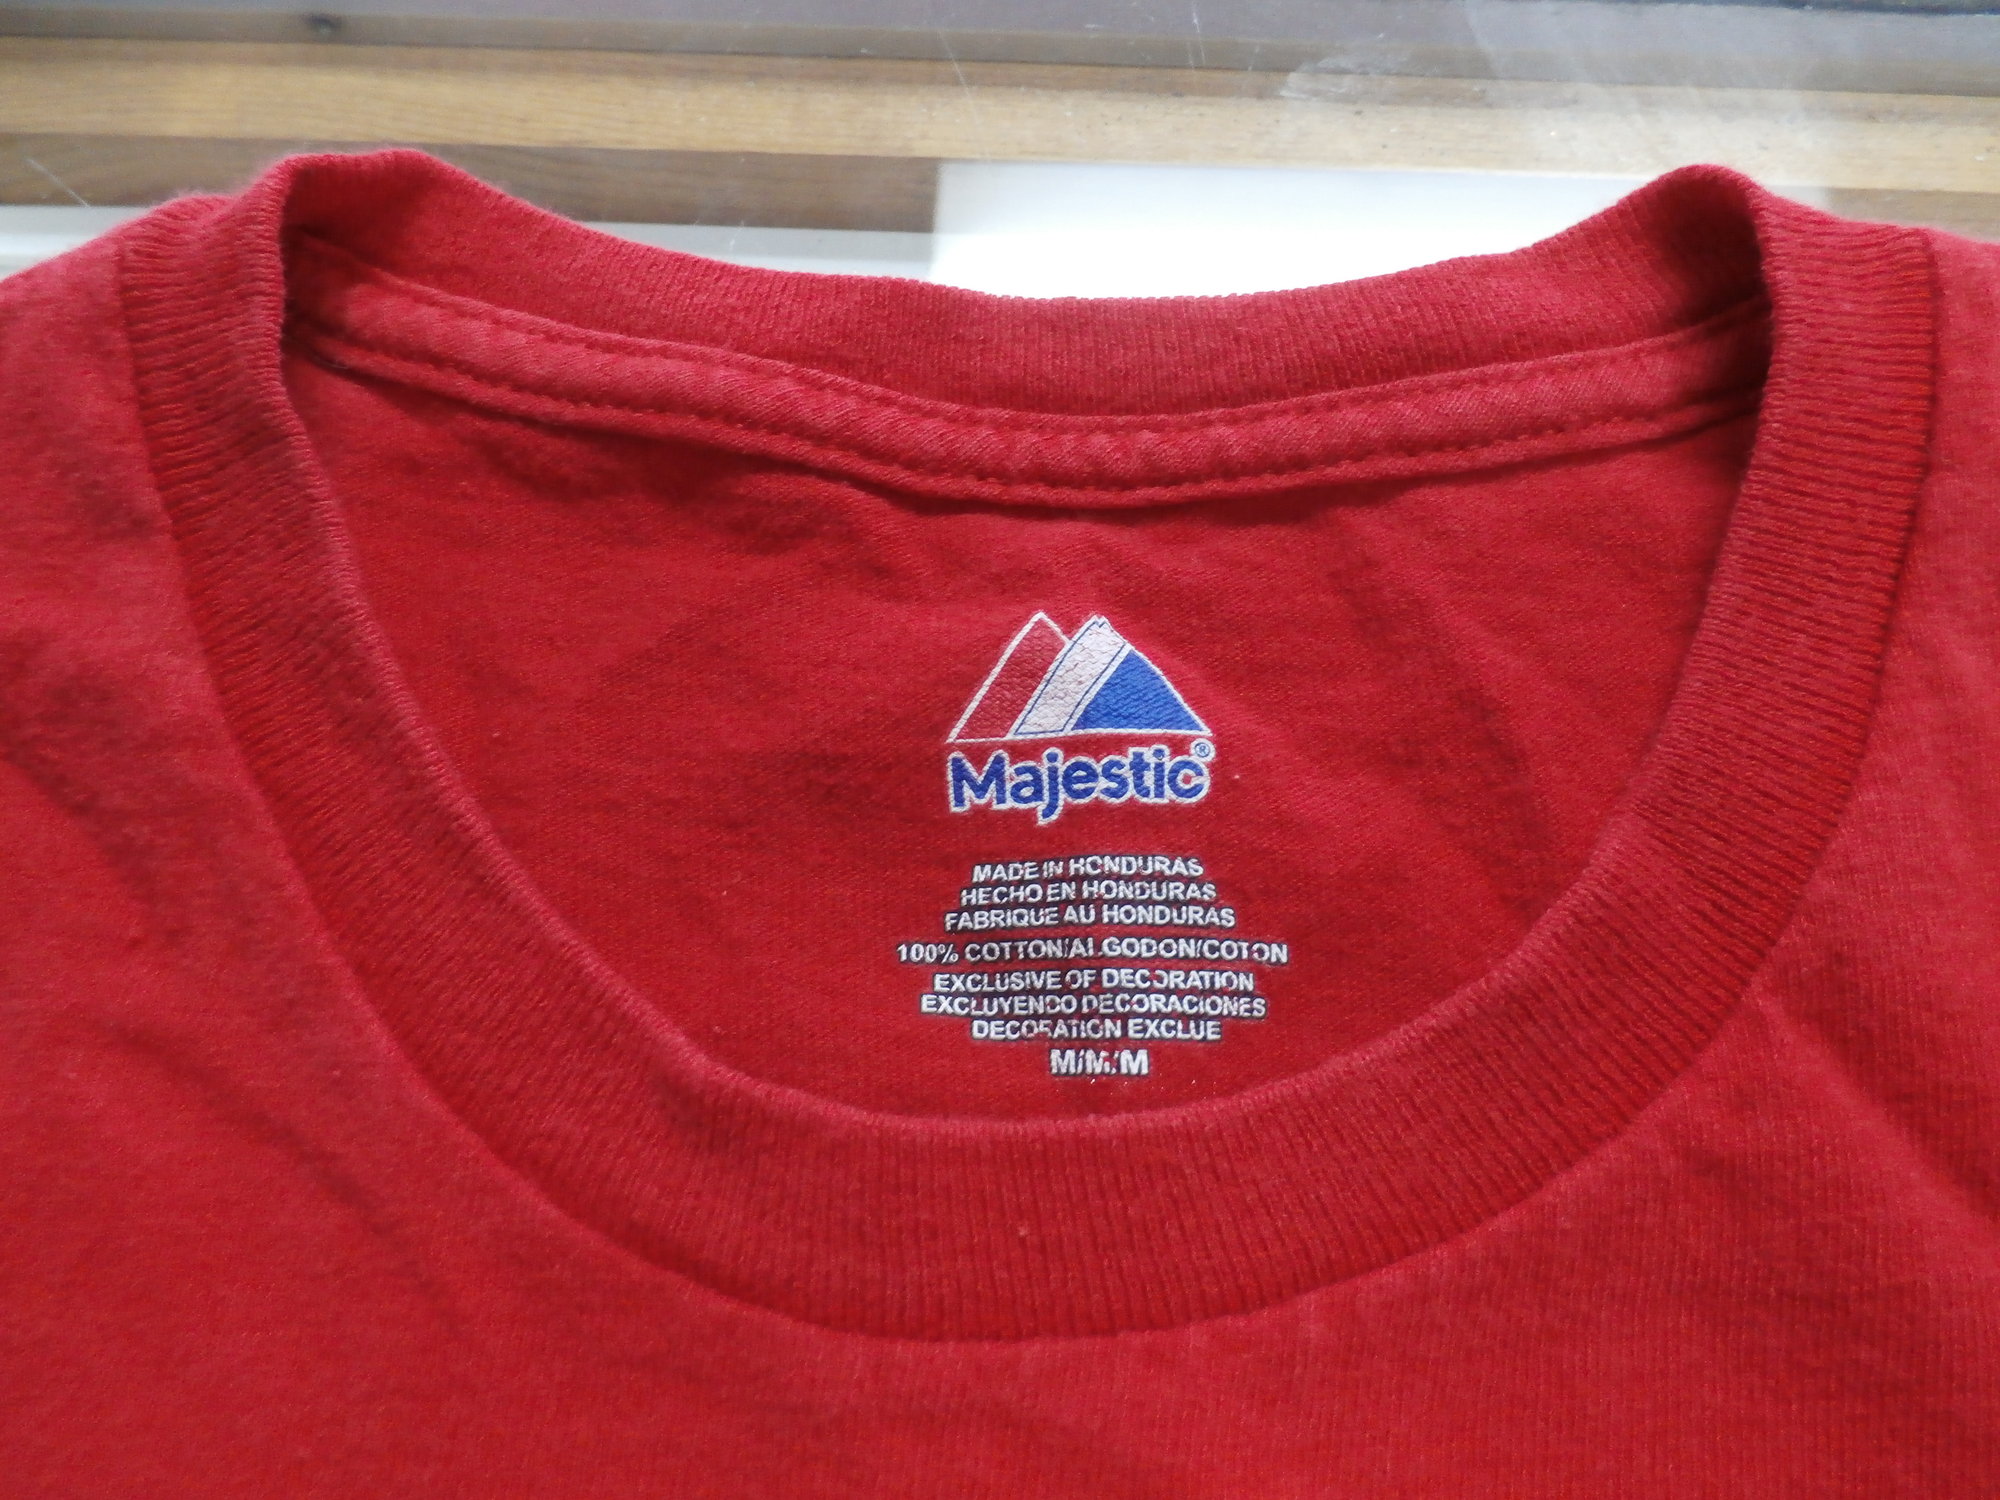 St Louis Cardinals Shirt  Recycled ActiveWear ~ FREE SHIPPING USA ONLY~